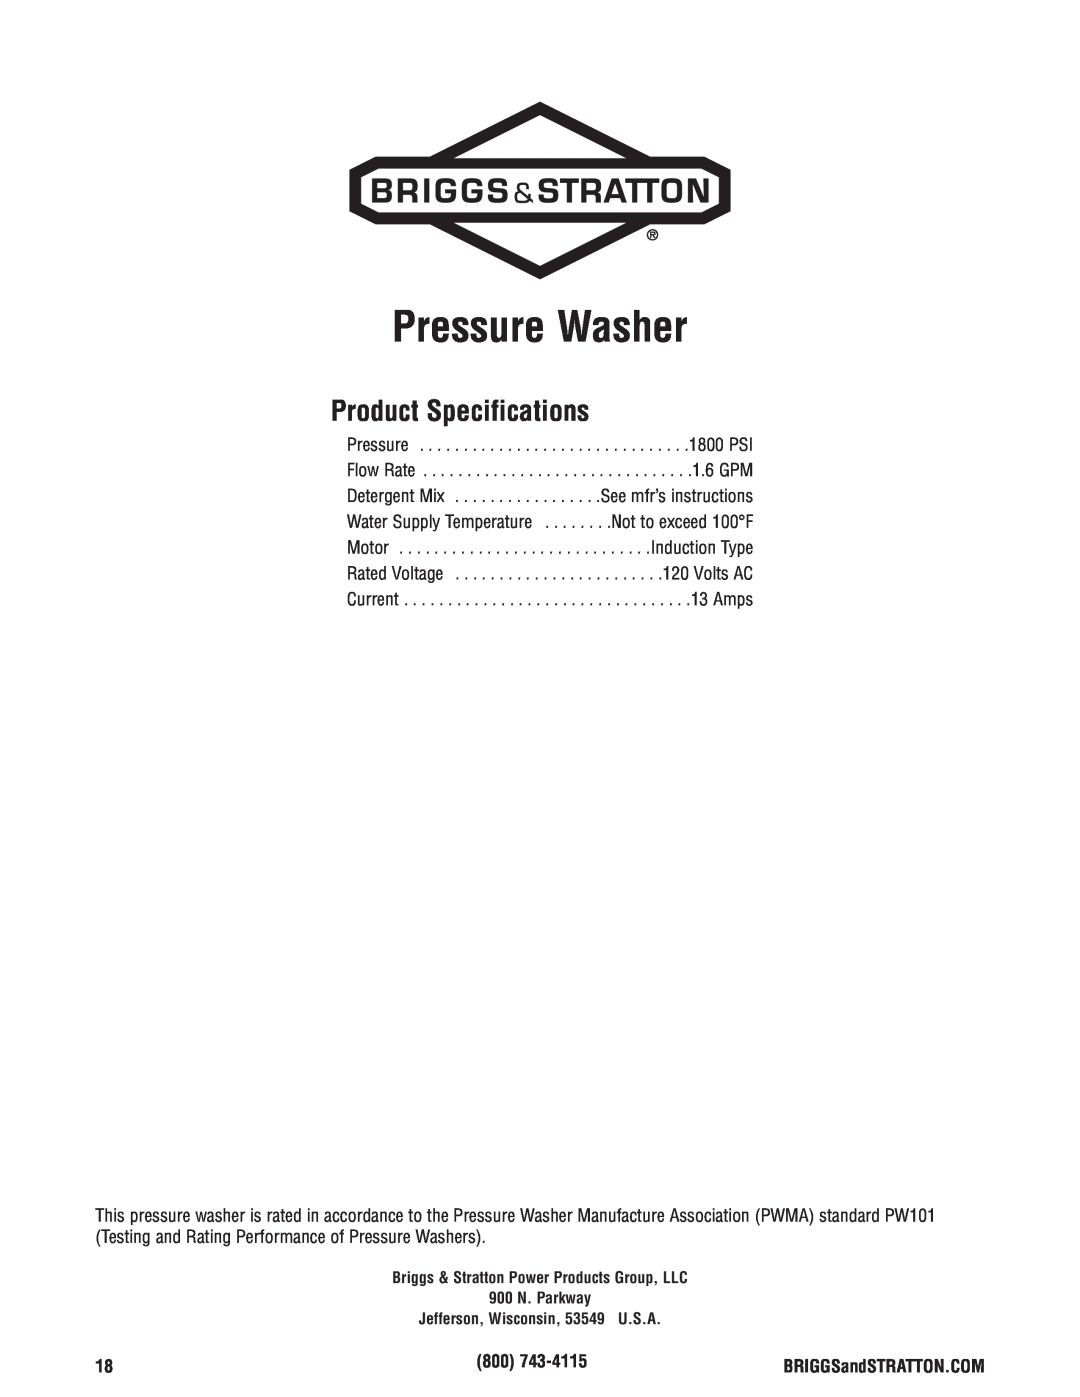 Briggs & Stratton Electric Pressure Washer manual Product Specifications 